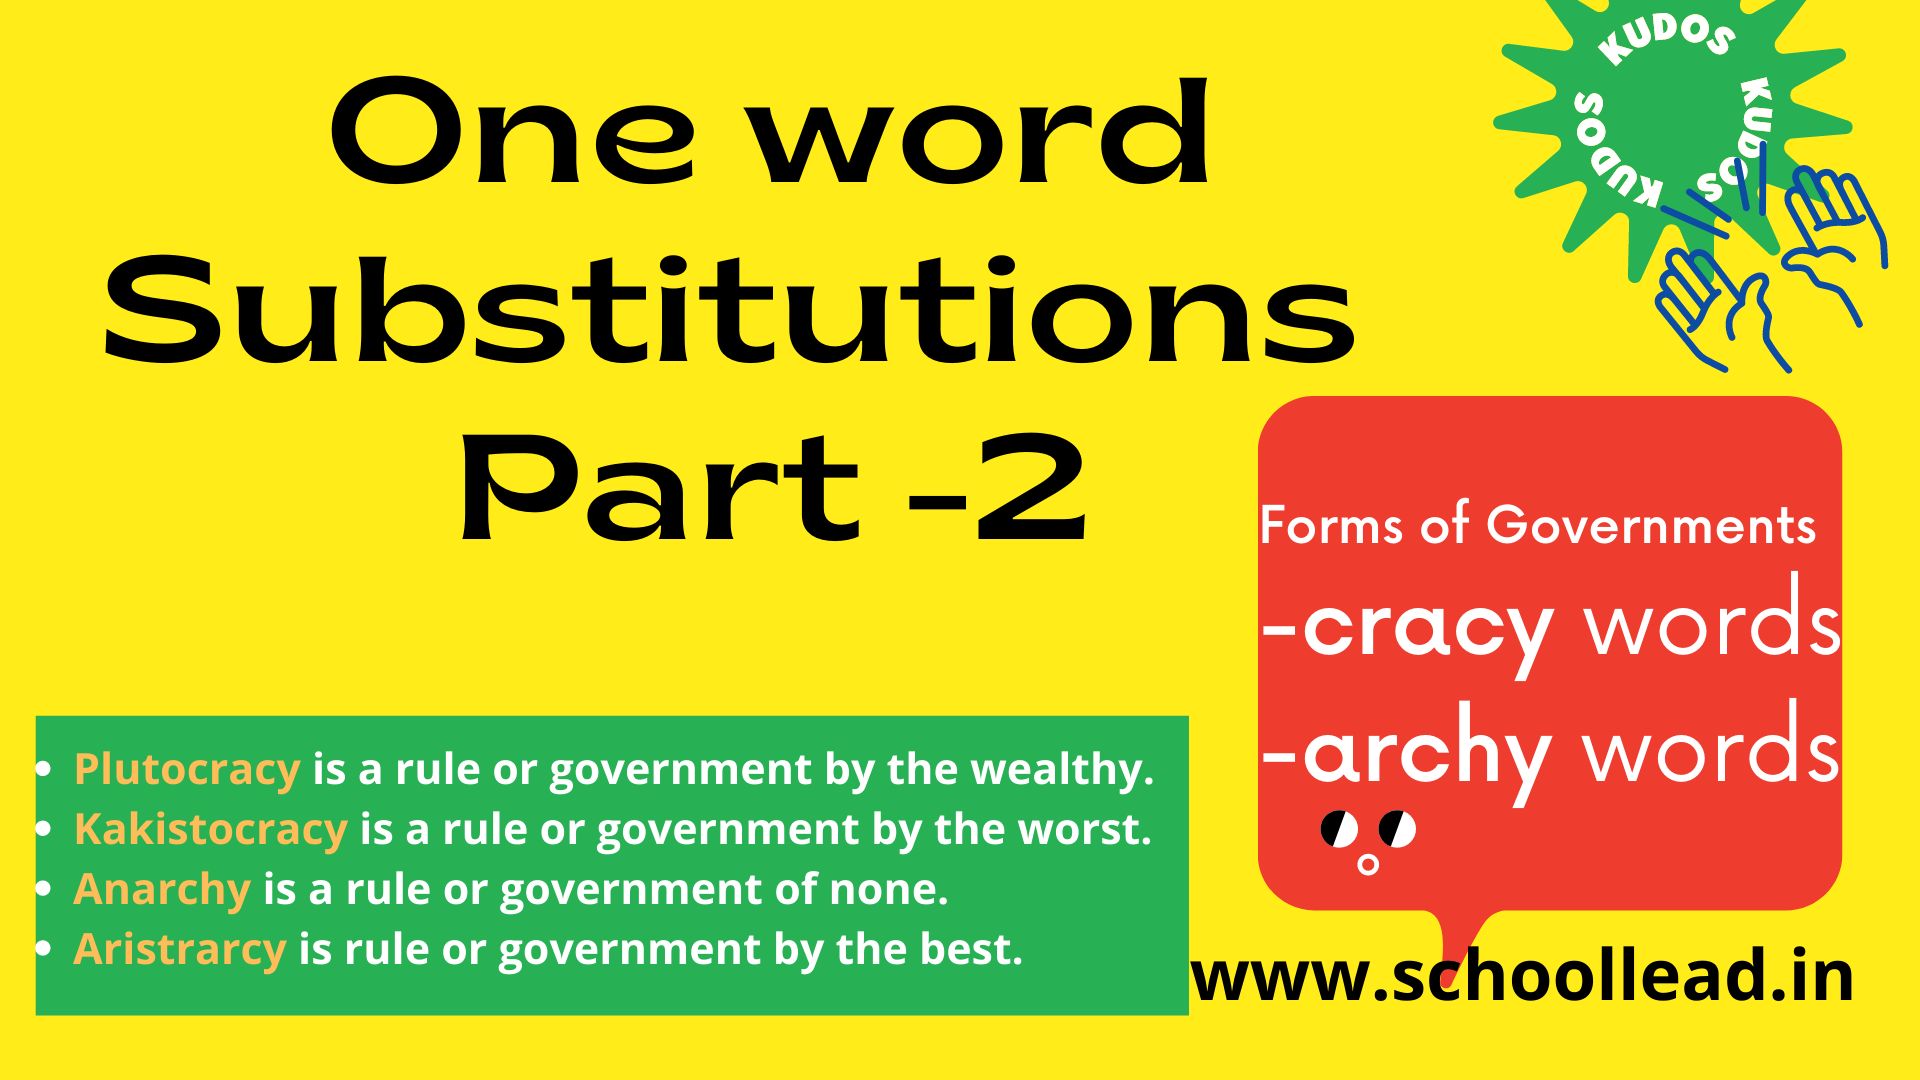 One word Substitutions